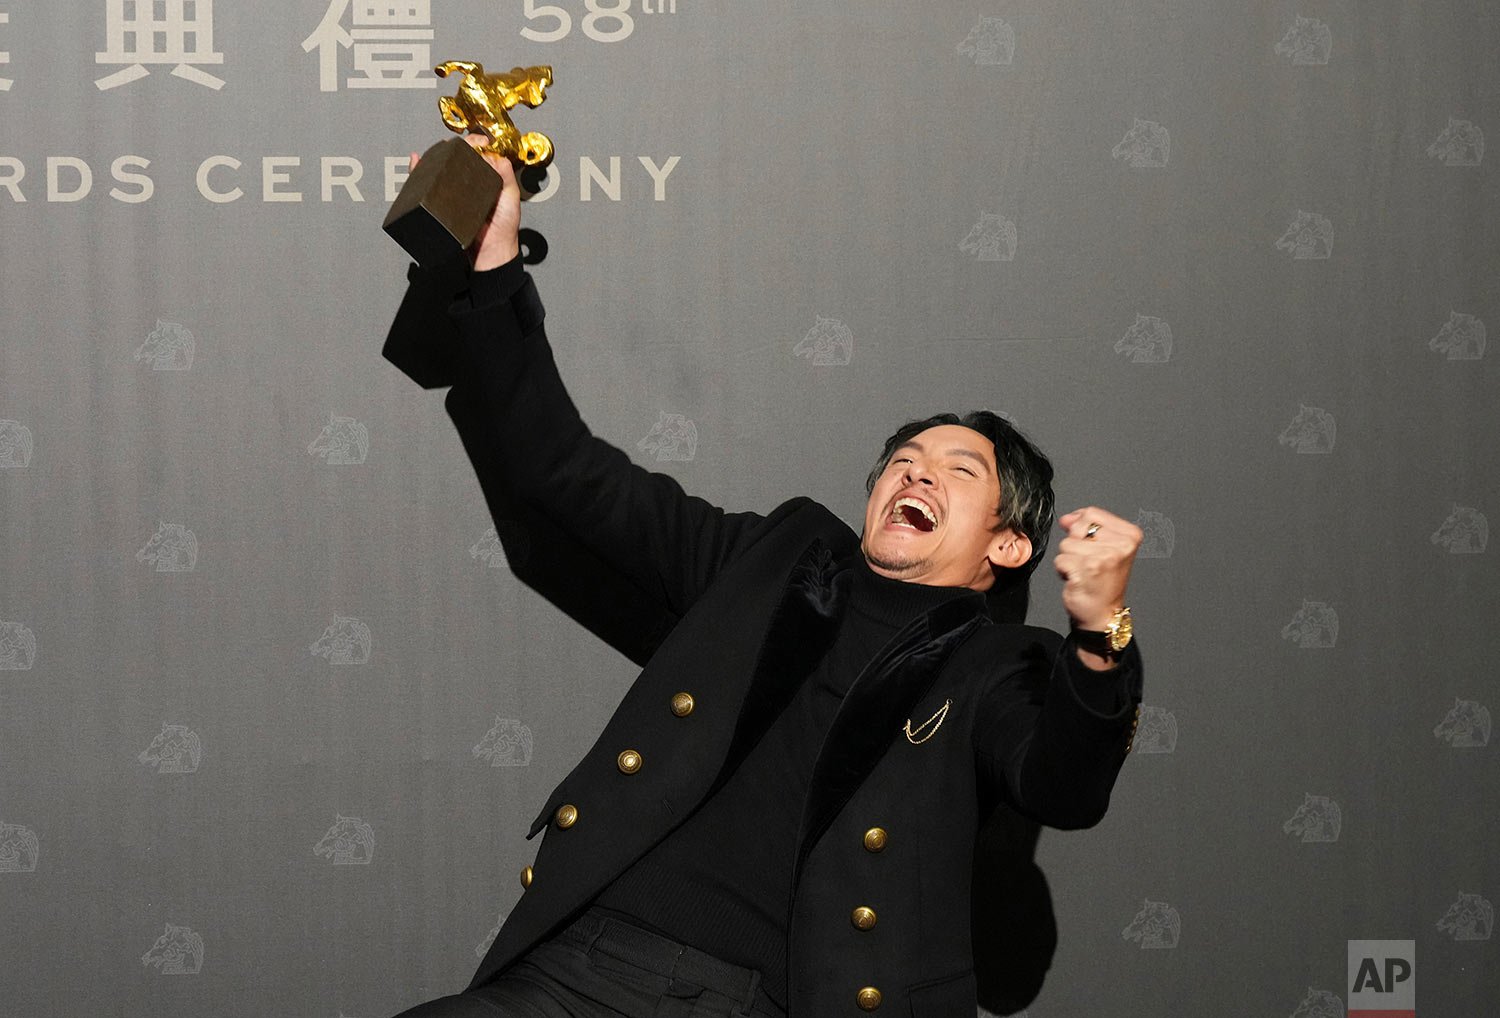  Taiwanese actor Chang Chen holds his award for Best Leading Actor for the film "The Soul" at the 58th Golden Horse Awards in Taipei, Taiwan, Saturday, Nov. 27, 2021.  (AP Photo/Billy Dai) 